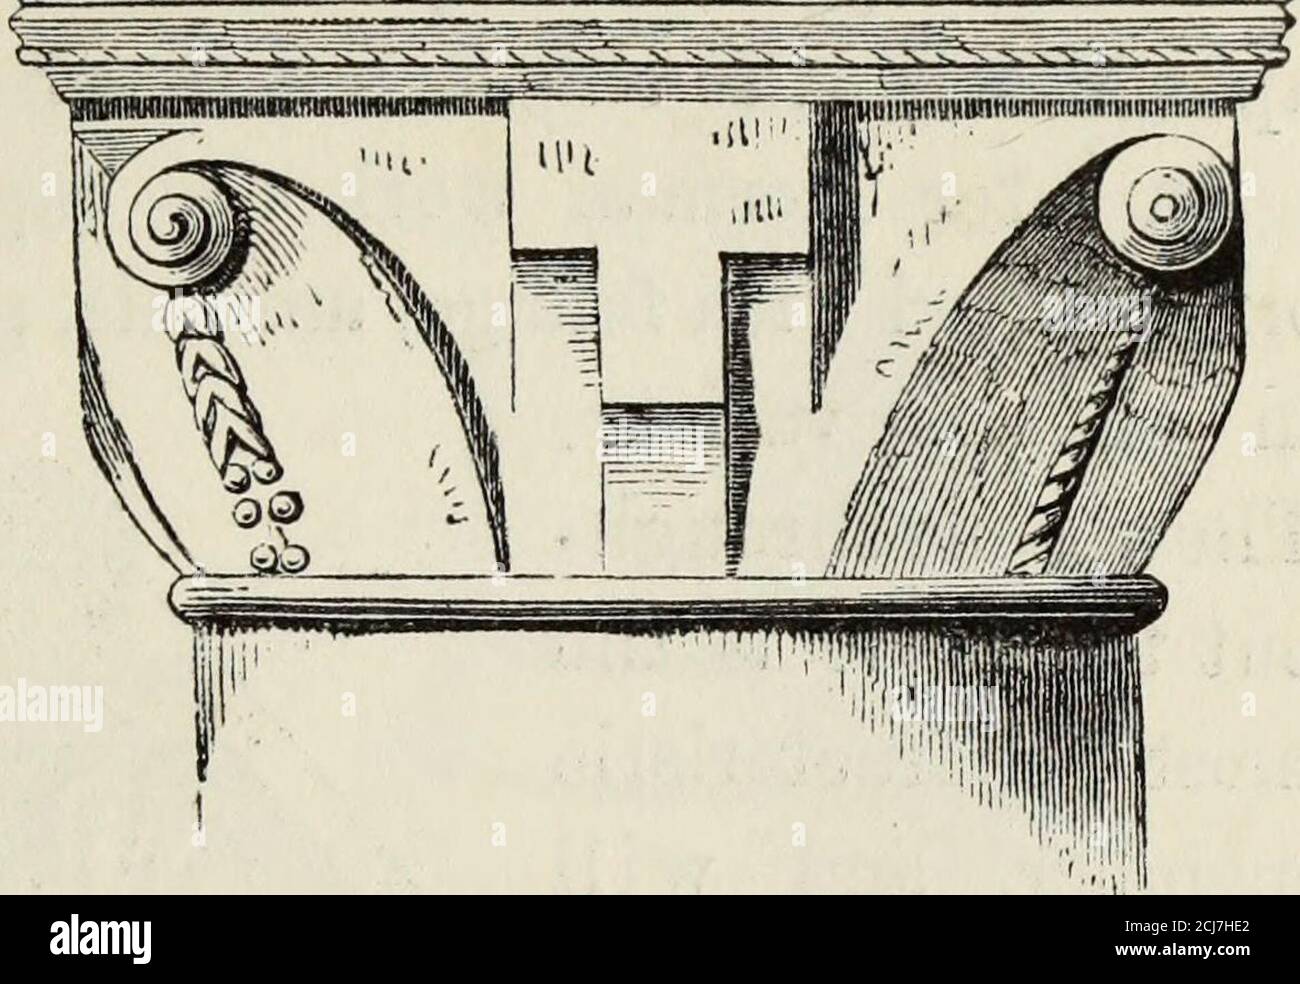 . An introduction to the study of Gothic architecture . 45. North Transept, Winchester,A.D. 1079-93. The Cushion Capital. NORMAN CAPITALS, 71 chapel of the White Tower, London (46), in the early part of the crypt atCanterbury, at St.Nicholas, Caen, andother early work,but it has neverbeen observed inlate work. The scollopedcapital belongs torather a later pe-riod than the plaincushion or the rude. 46. WMte Tower, London, A.D. 1081.Early Capital witli rude volutes and the Tau. Ionic, and does not occur before the time of Henry I.;as at Stourbridge (47), Malmesbury (43), and Kirkstall(44). This Stock Photo